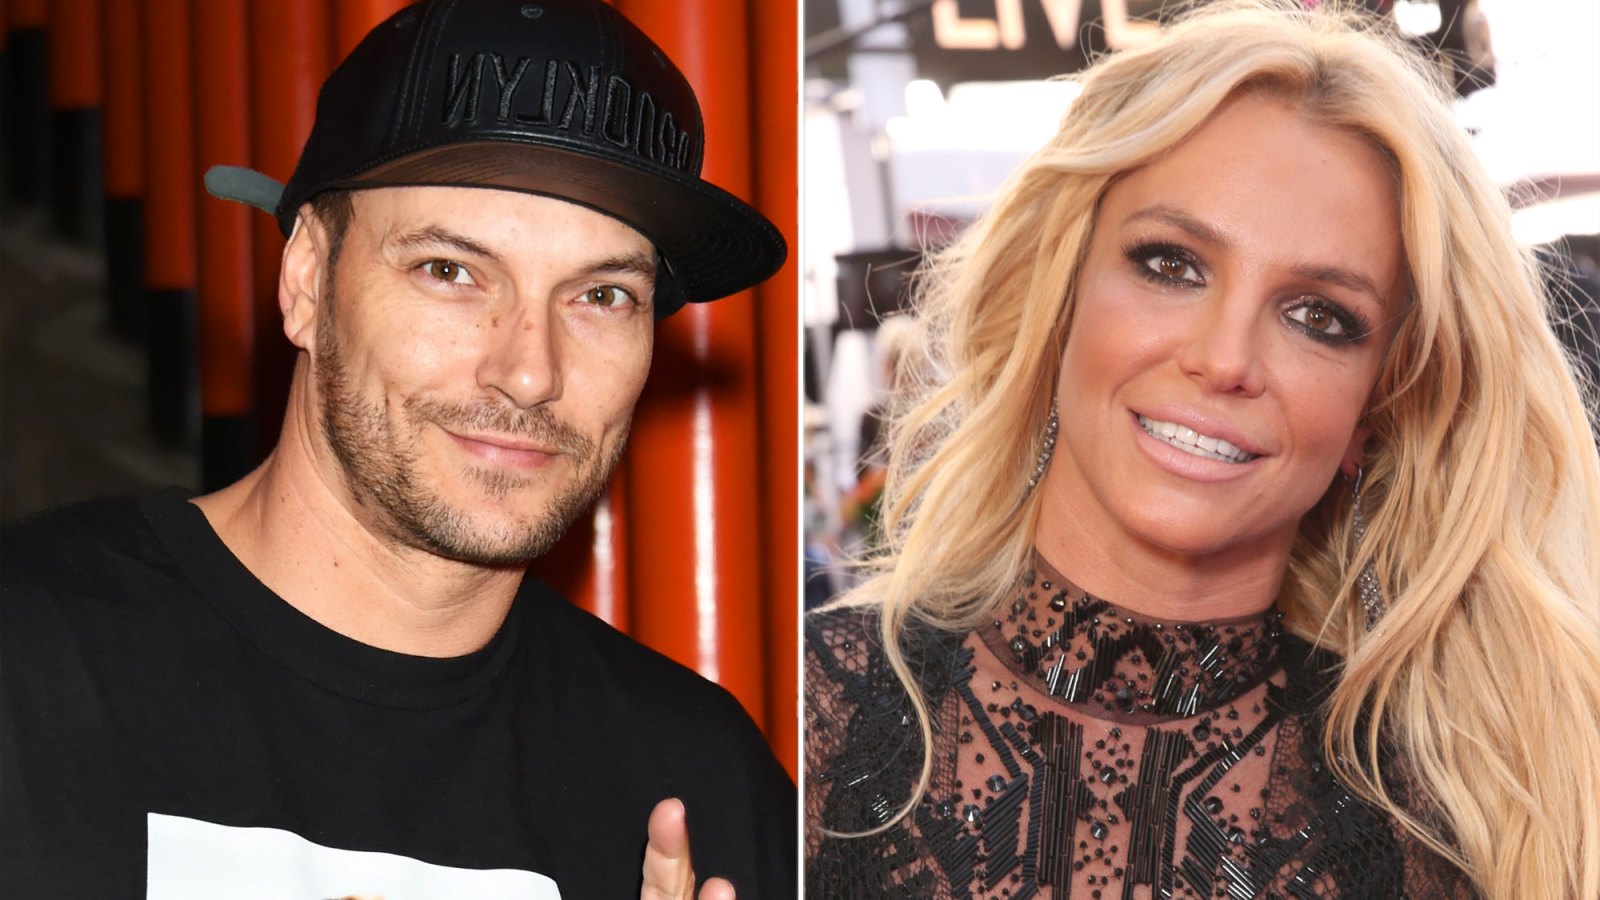 Kevin Federline and Britney Spears alimony